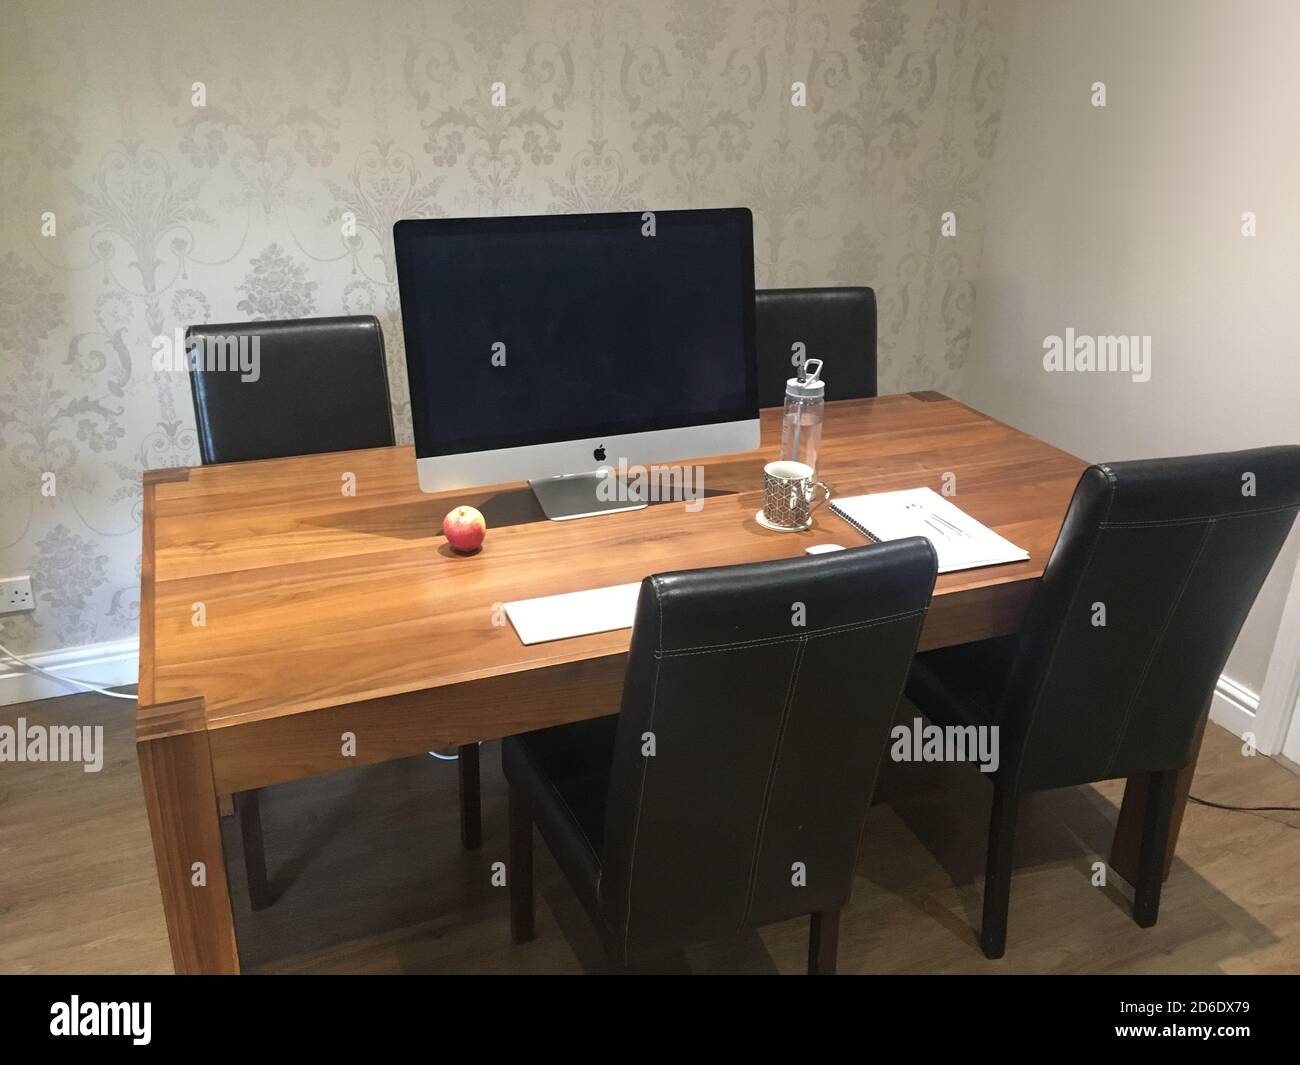 WFH Work From Home Working From Home Dining Table Dining Room Stock Photo